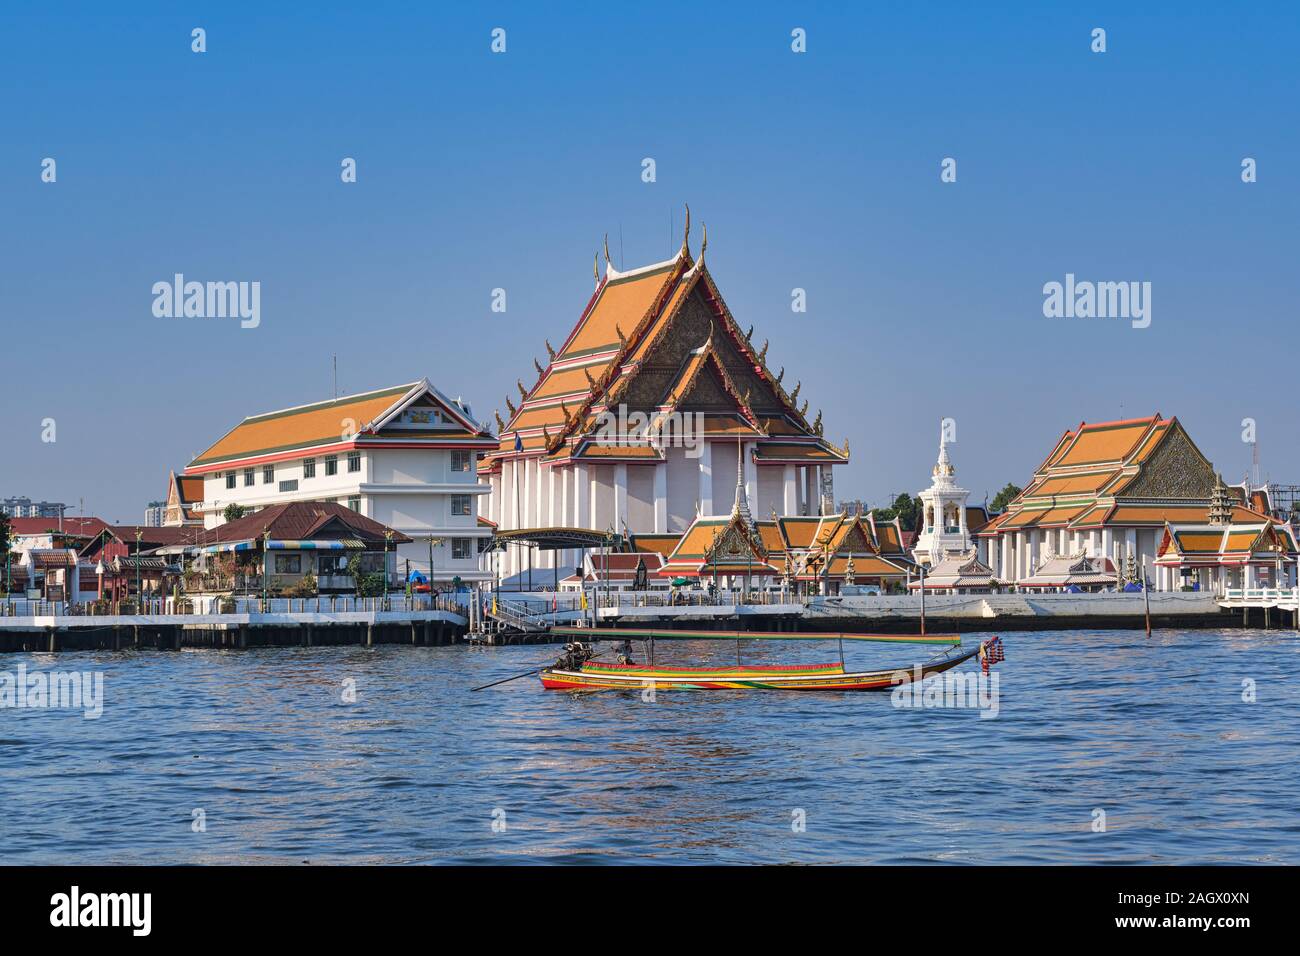 A so-called long-tail boat on the Chao Phraya River in Bangkok, Thailand with (temple) Wat Kalayanamit in the background Stock Photo